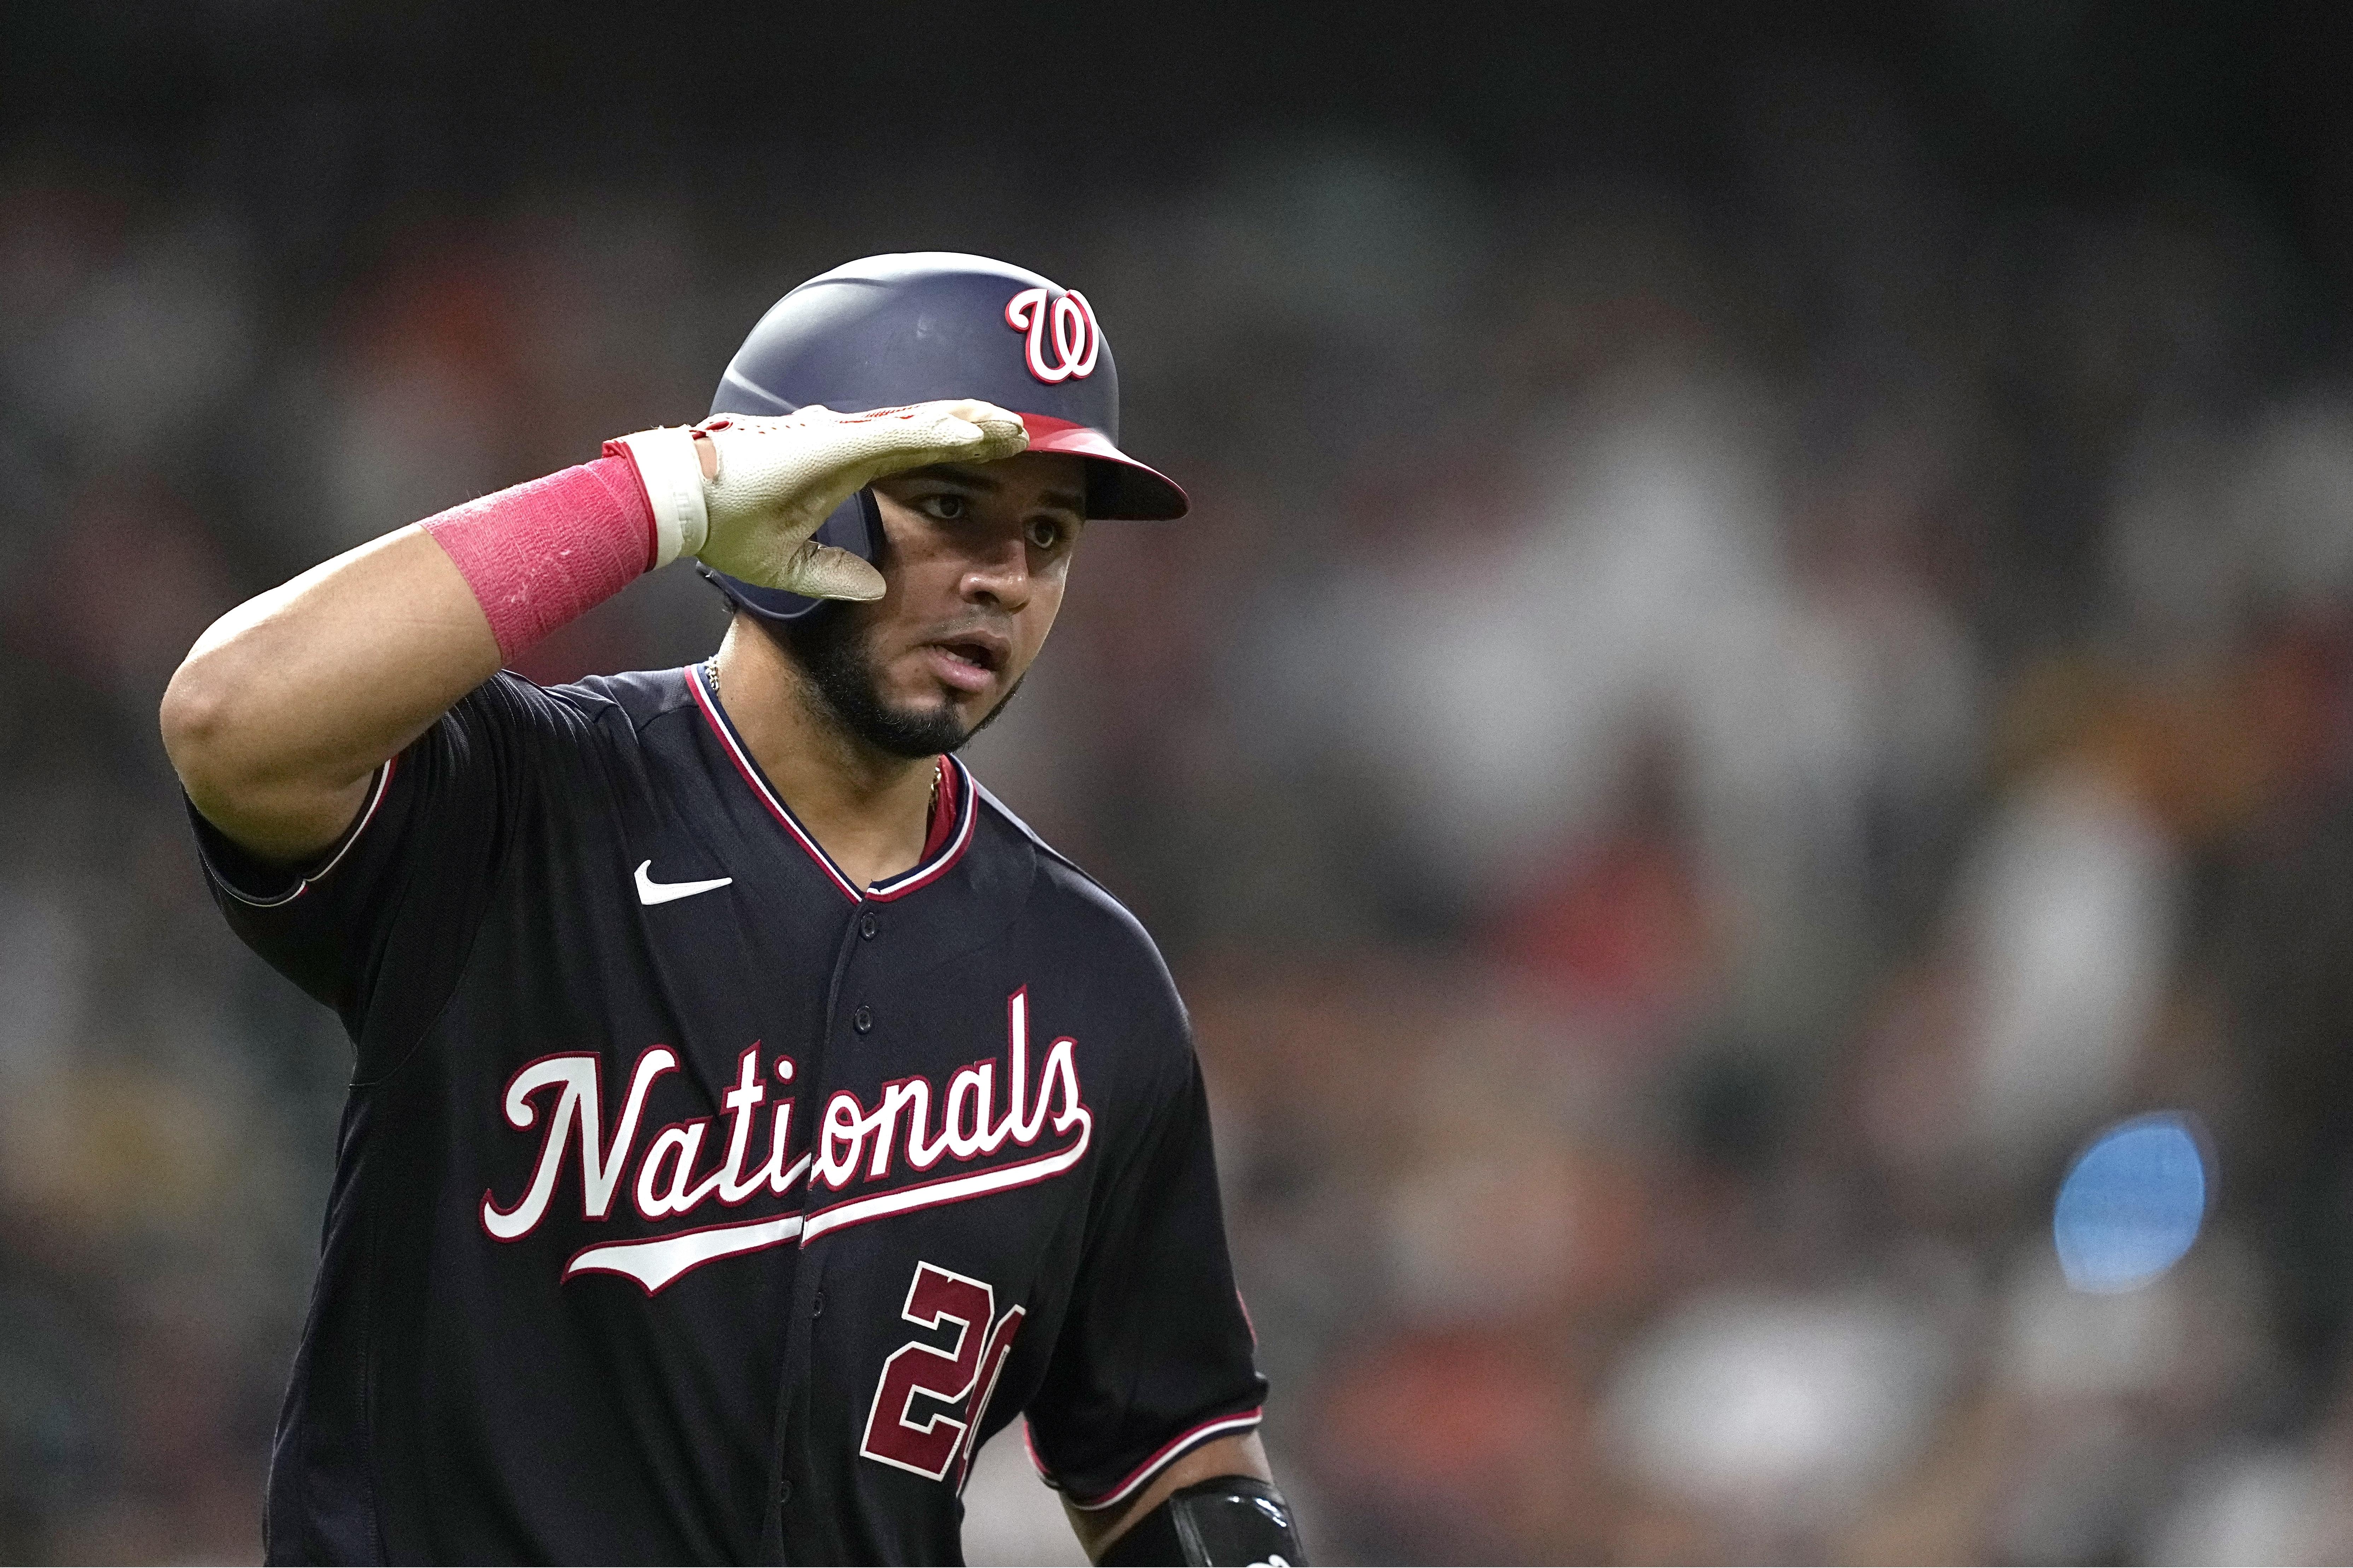 Ruiz gets 2 big hits late as the Nationals beat the Astros 4-1 in 10  innings to avoid a sweep